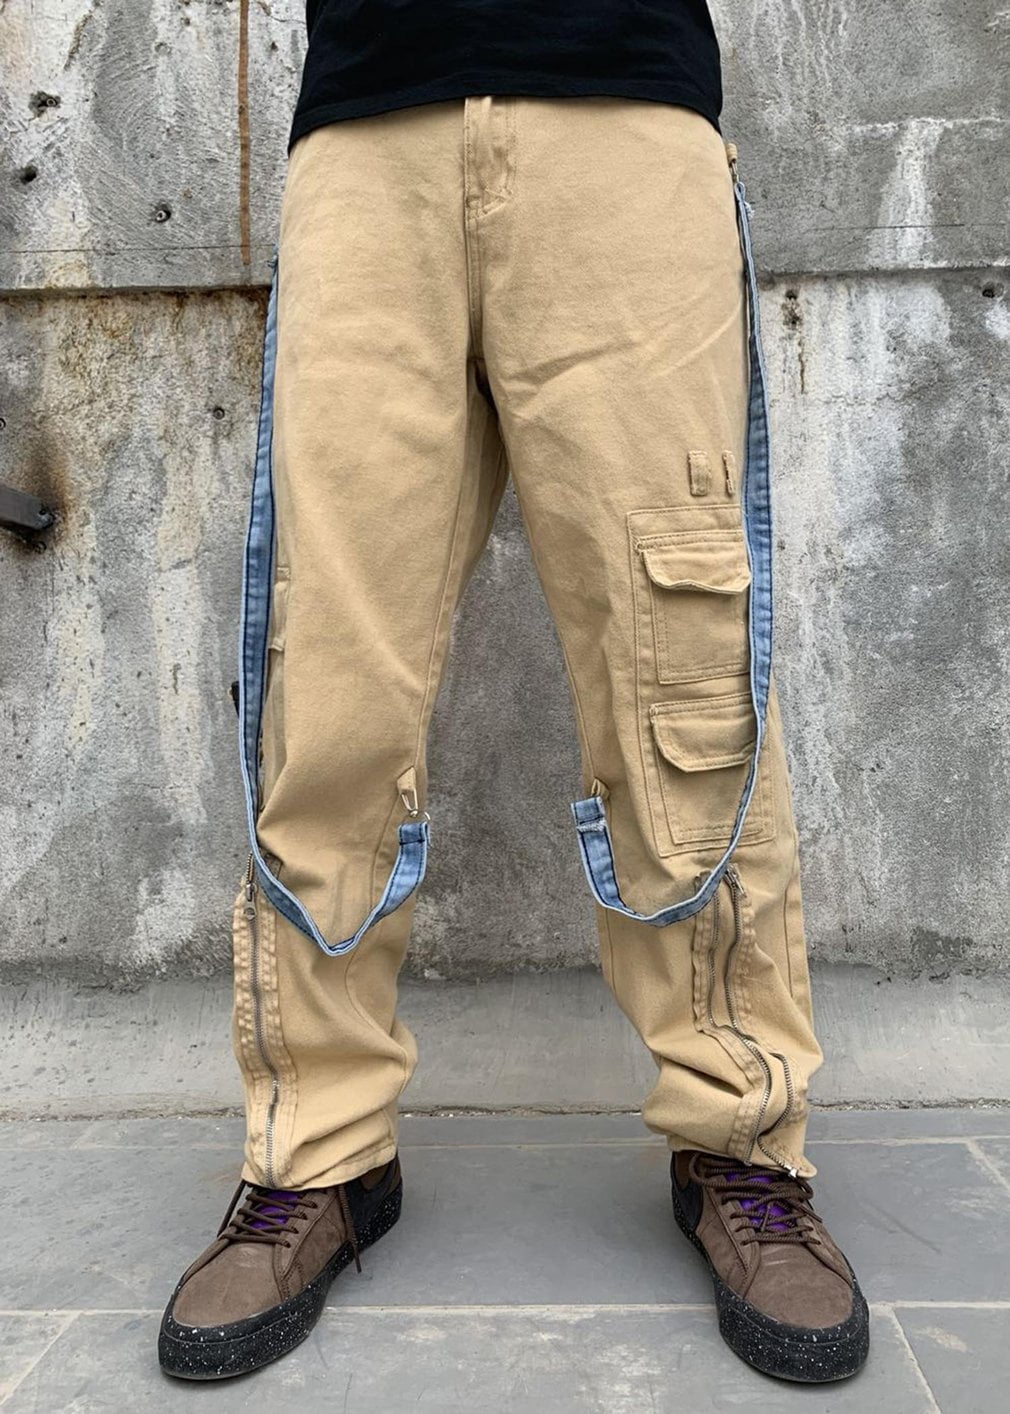 SURPLUS INFANTRY TROUSERS COMBAT PANTS MENS CARGOS BAGGY ARMY STYLE COYOTE S-XXL 